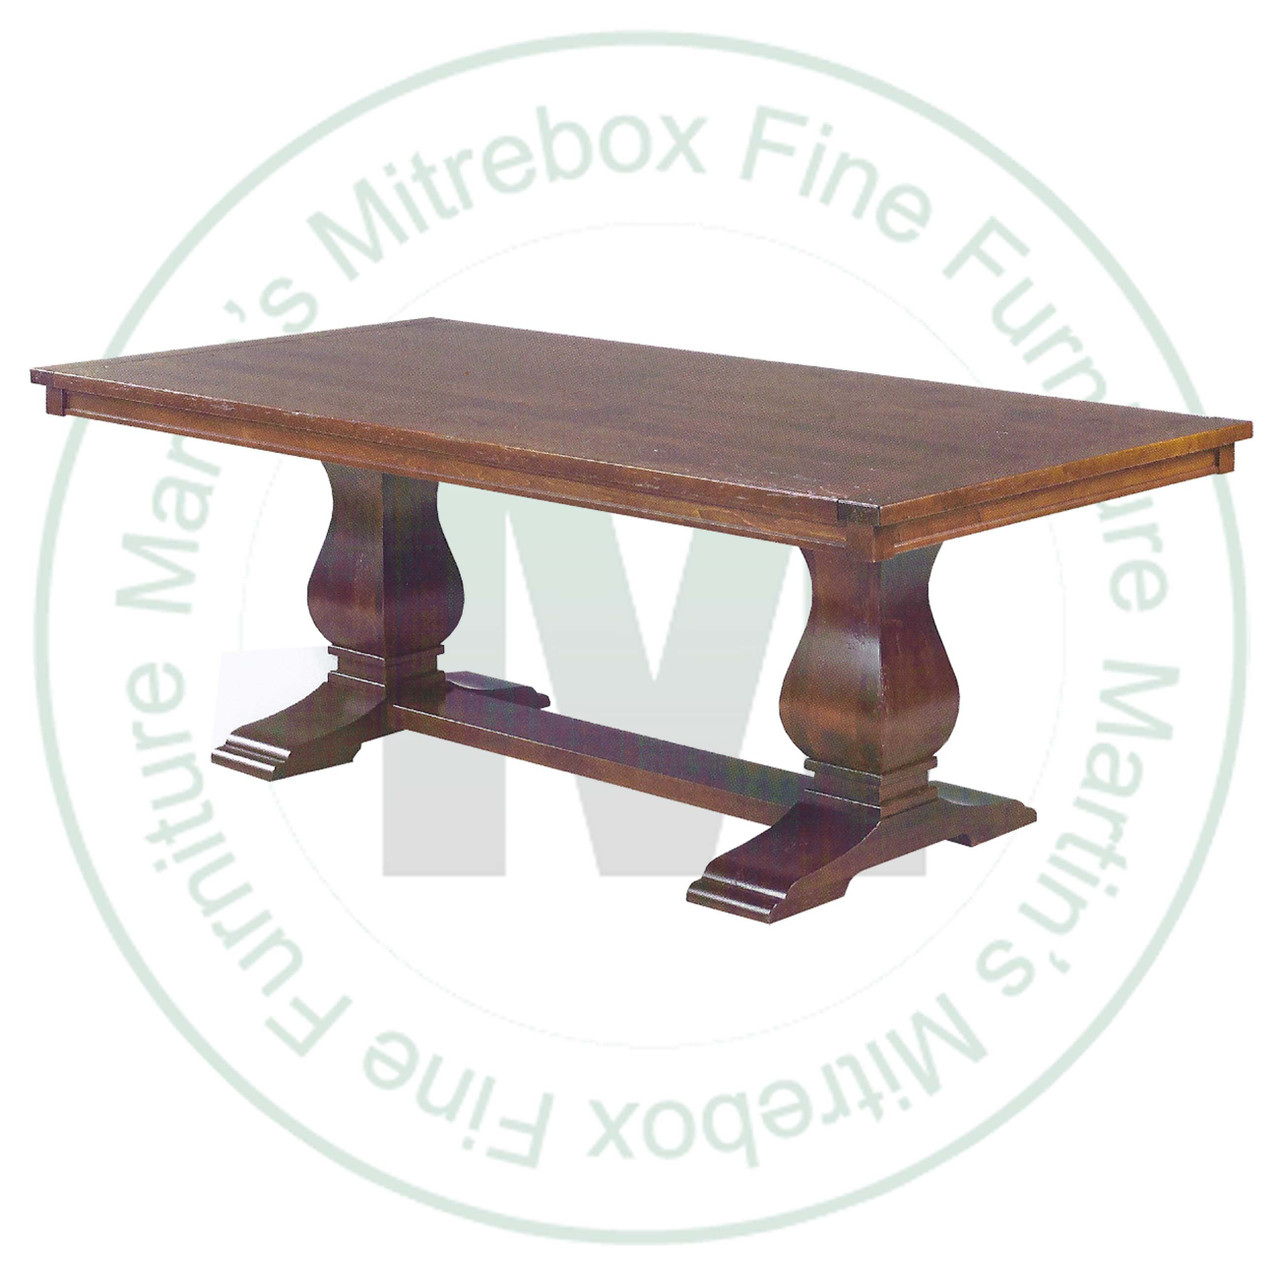 Oak Socrates Double Pedestal Table 48''D x 66''W x 30''H With 3 - 12'' Leaves. Table Has 1.25'' Thick Top